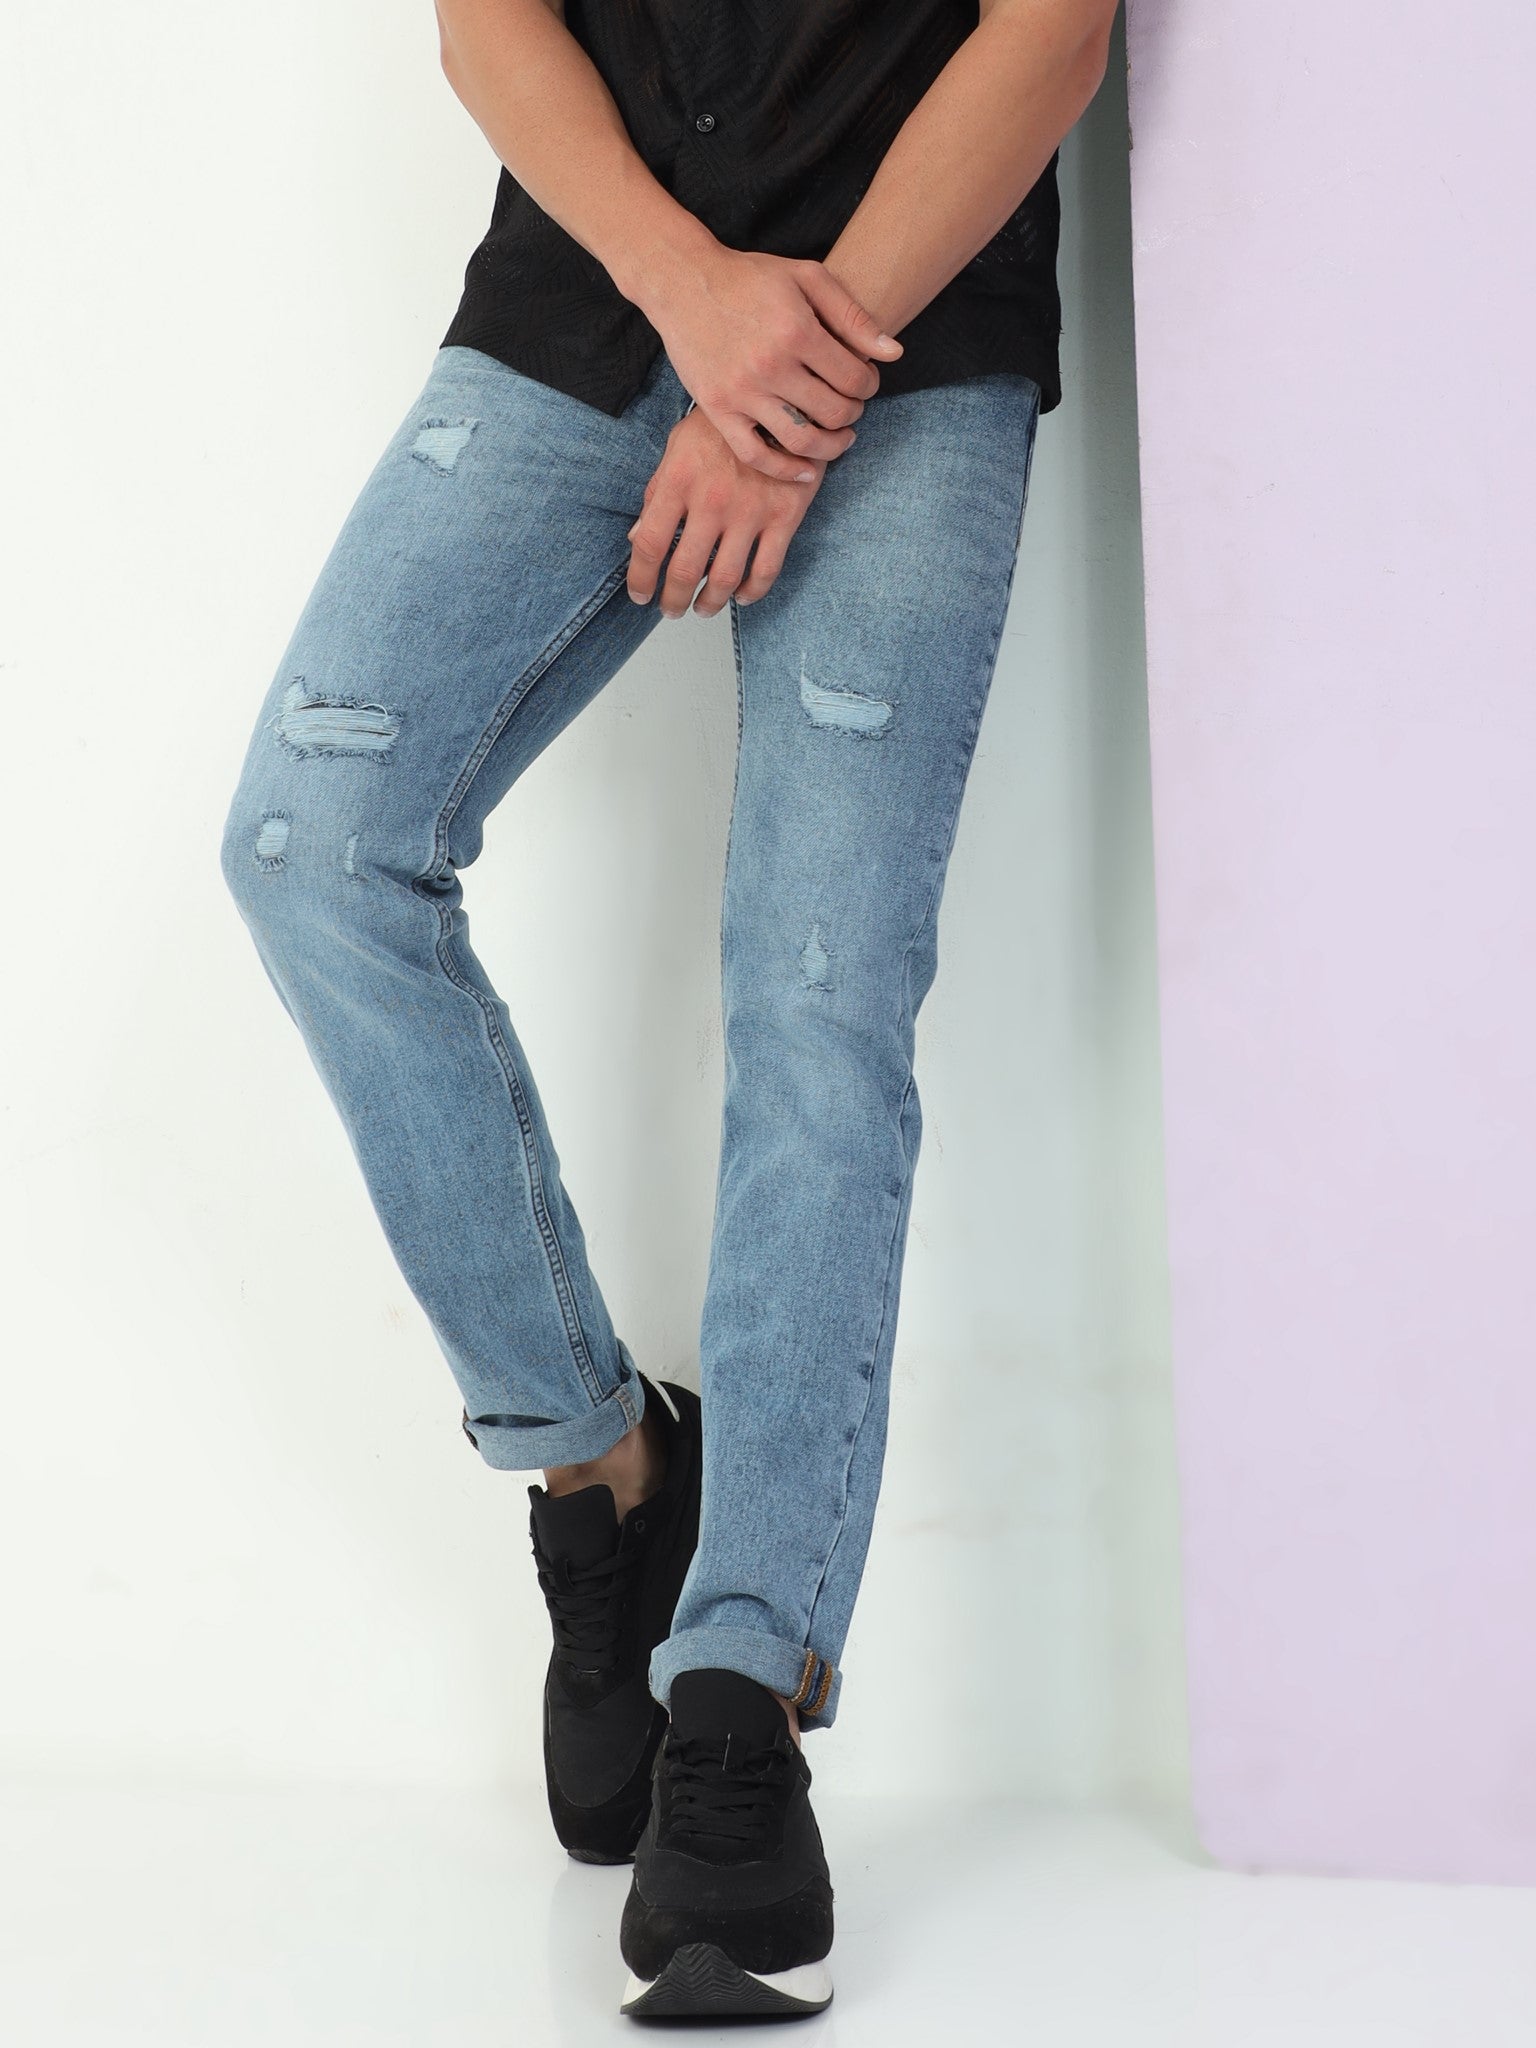 Midblue Distressed Slim Fit Jeans for Men